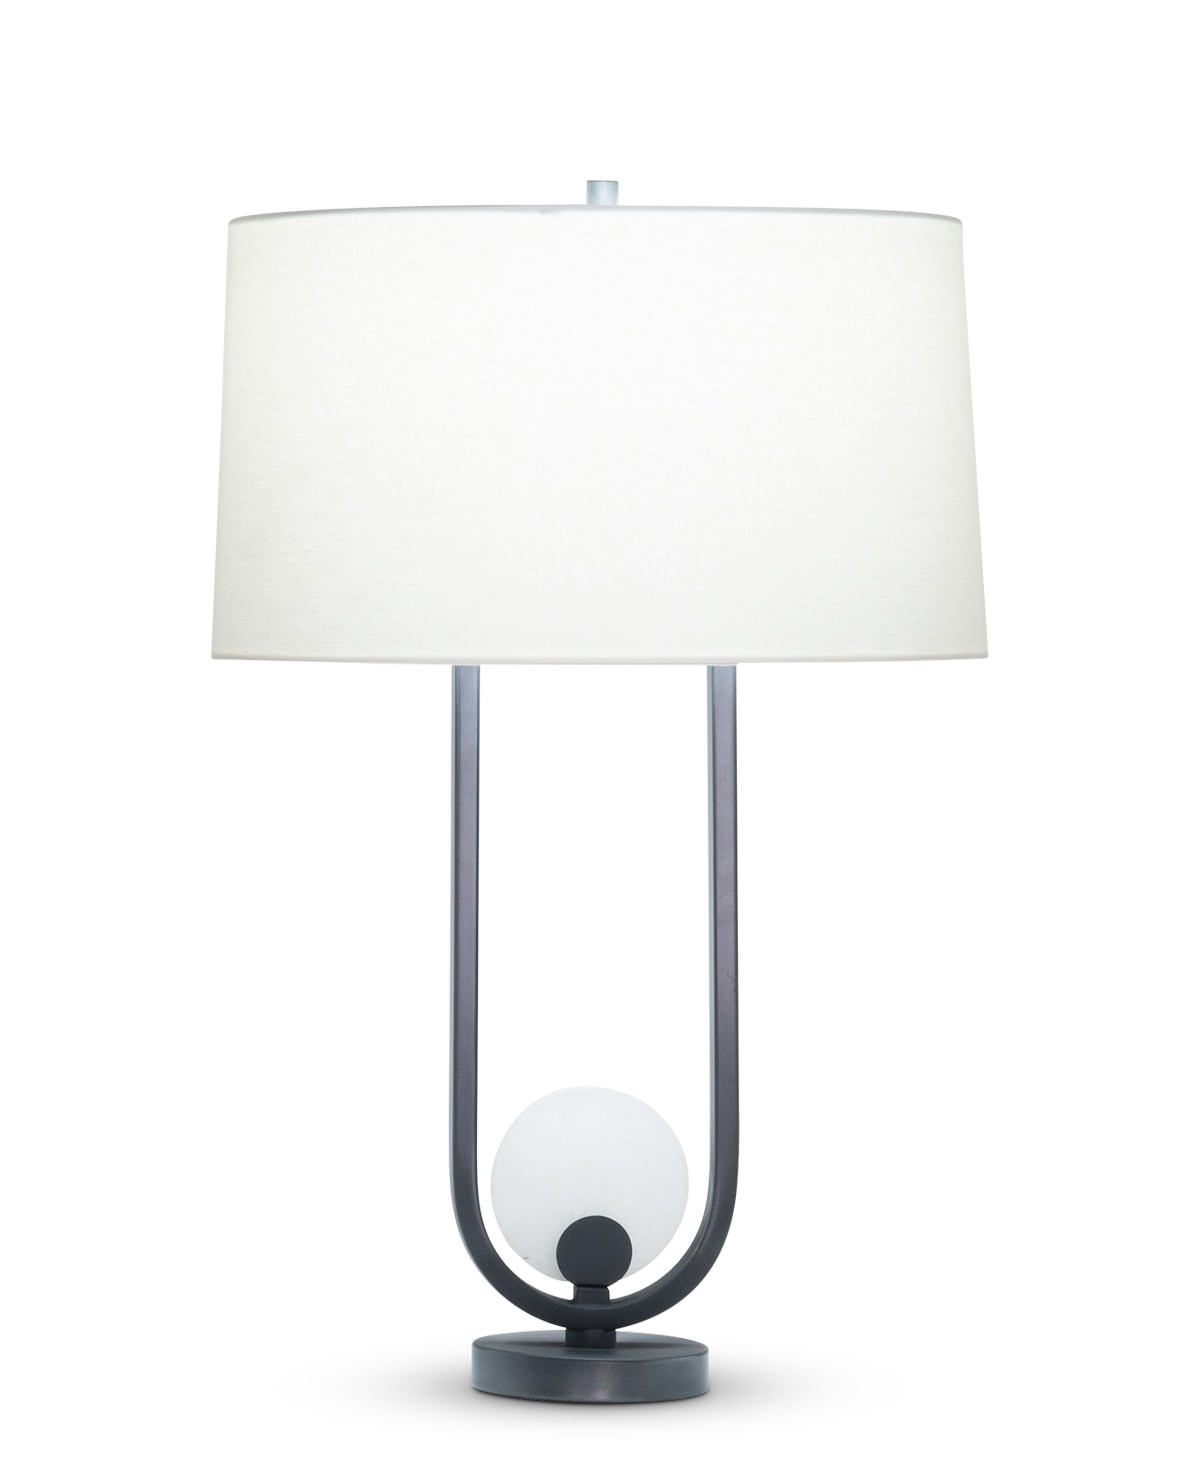 FlowDecor Archie Table Lamp in metal with bronze finish and alabaster and off-white linen oval shade (# 4516)